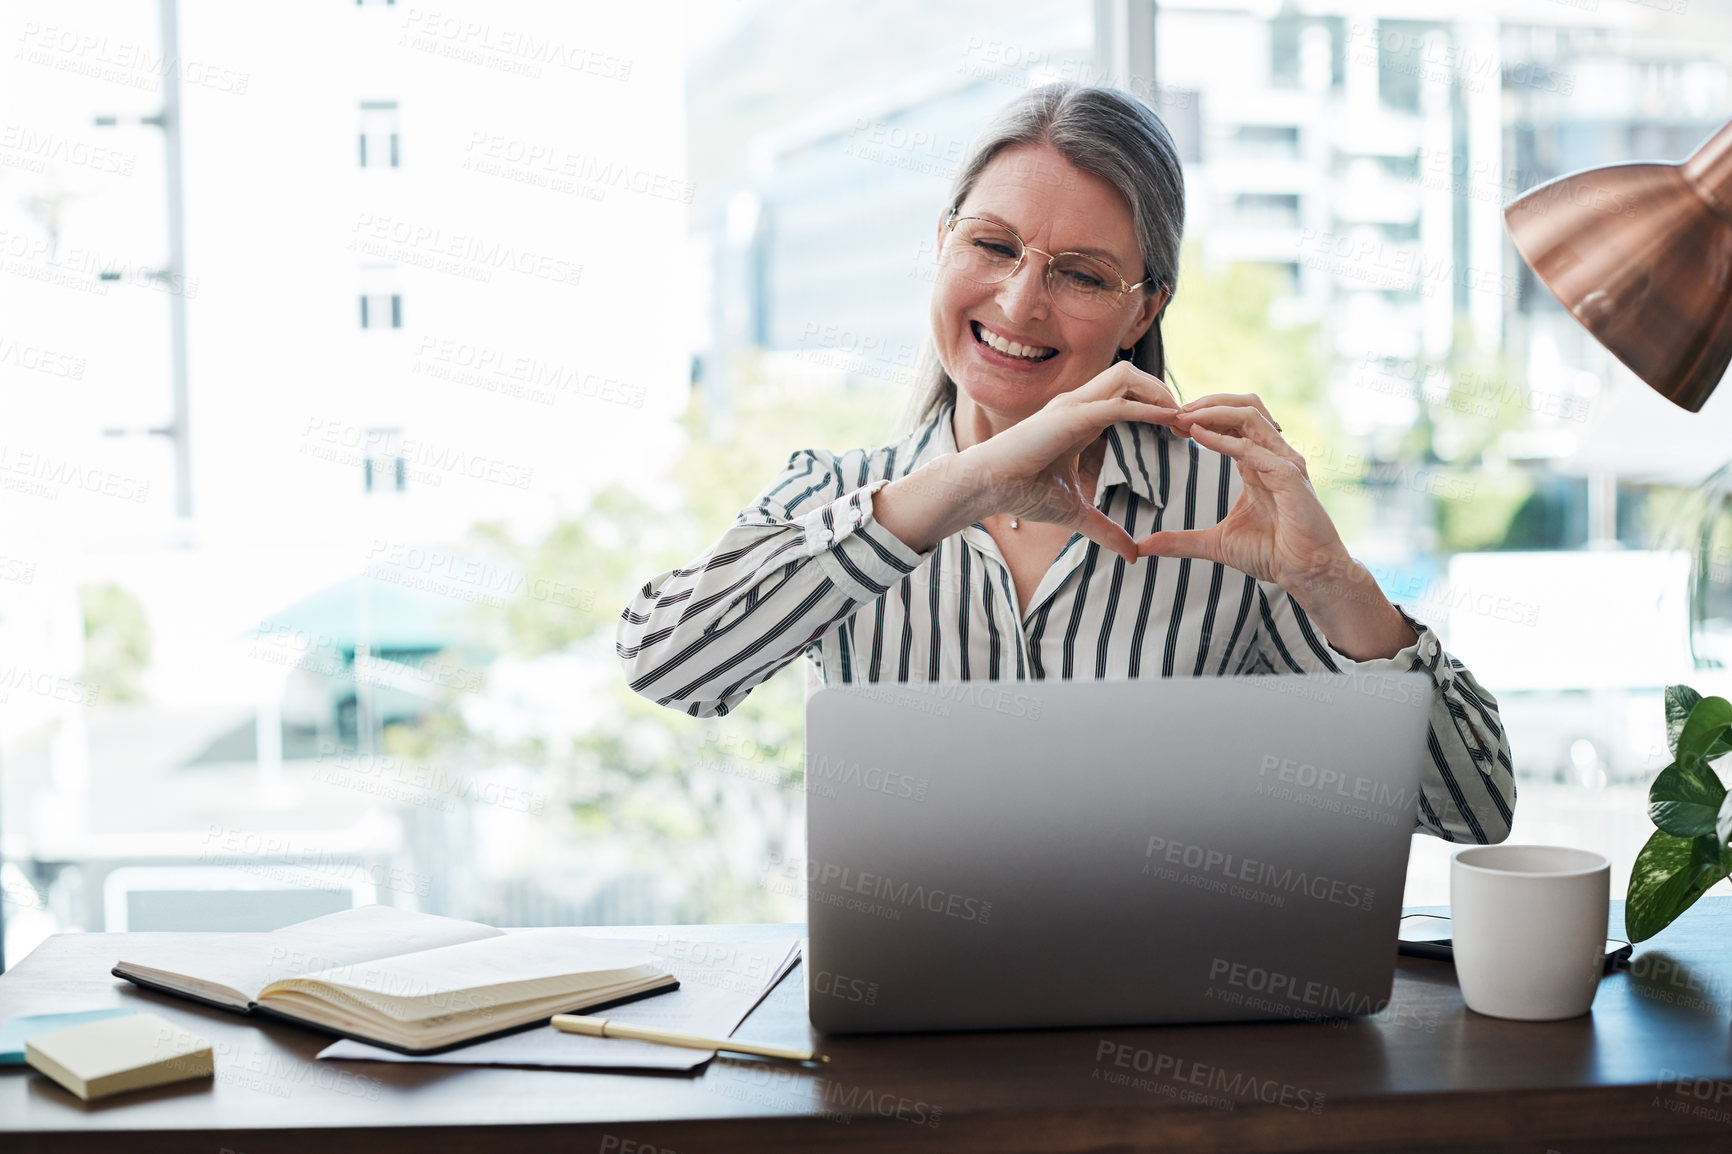 Buy stock photo Shot of a mature businesswoman with a heart formed hand gesture video chatting on her laptop in a modern office